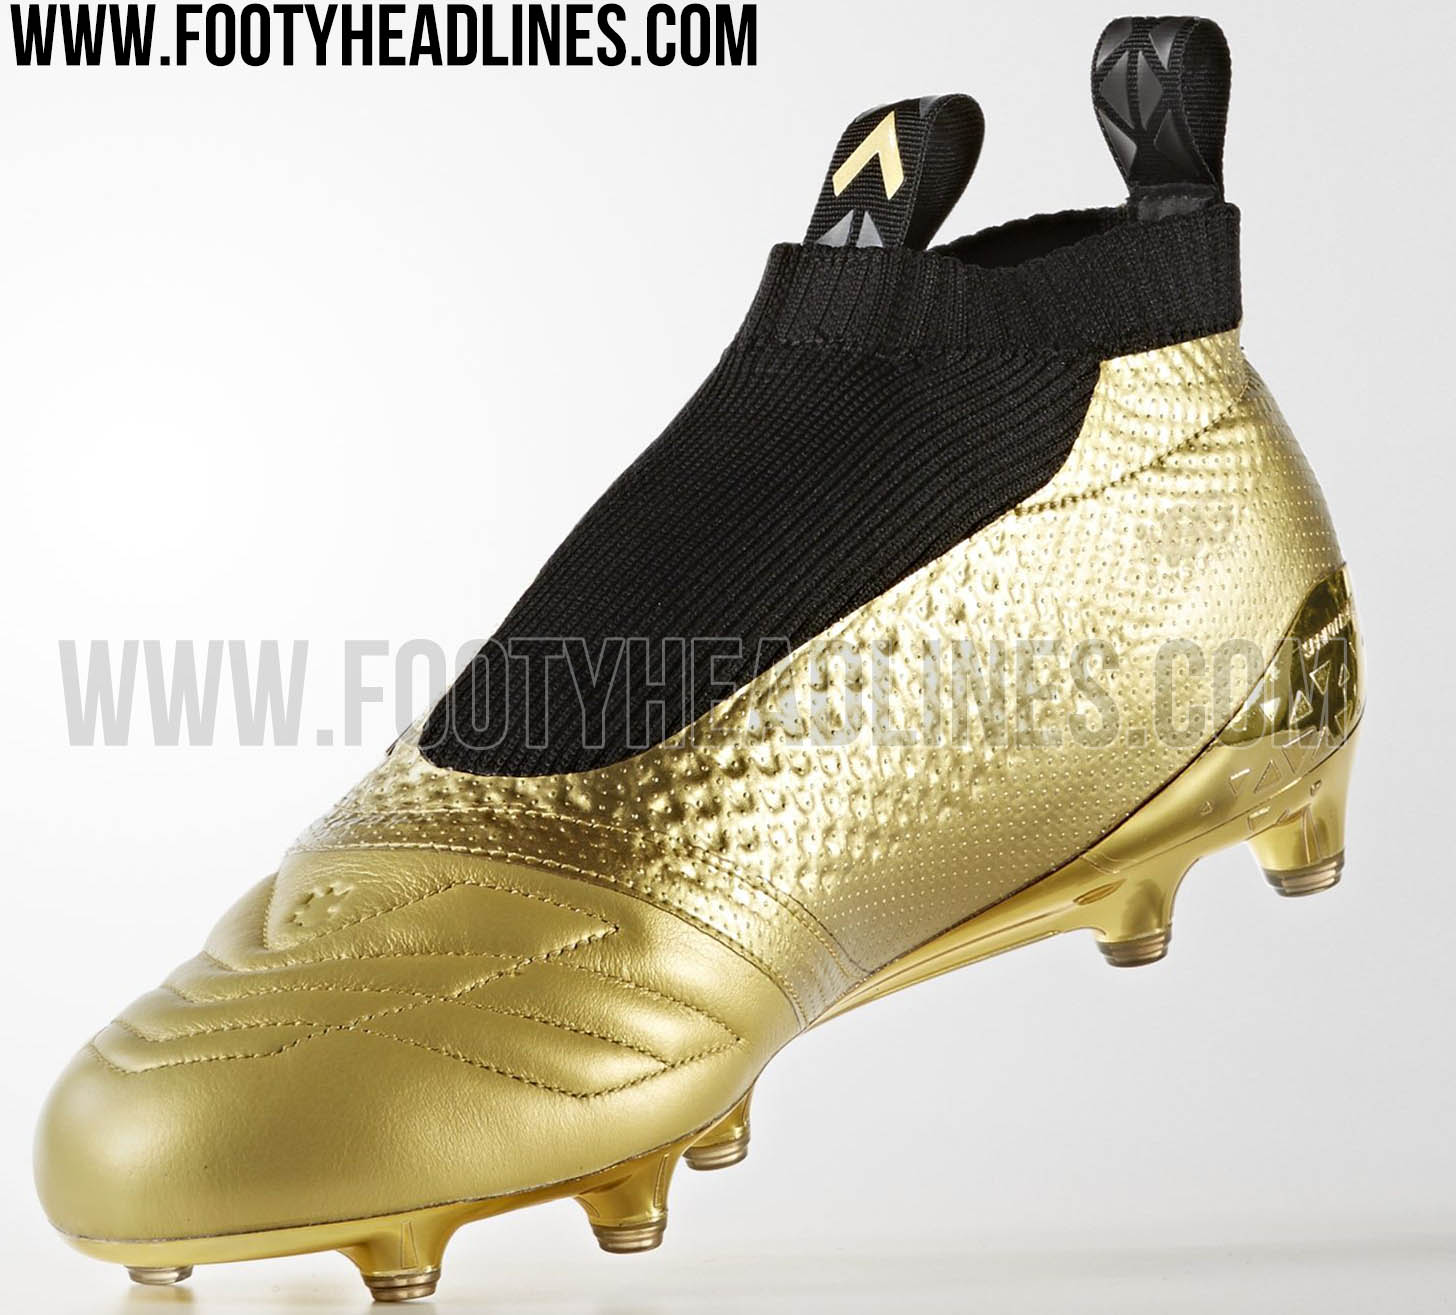 Gold Adidas 16+ PureControl Space Craft Pack Boots Released - Footy Headlines